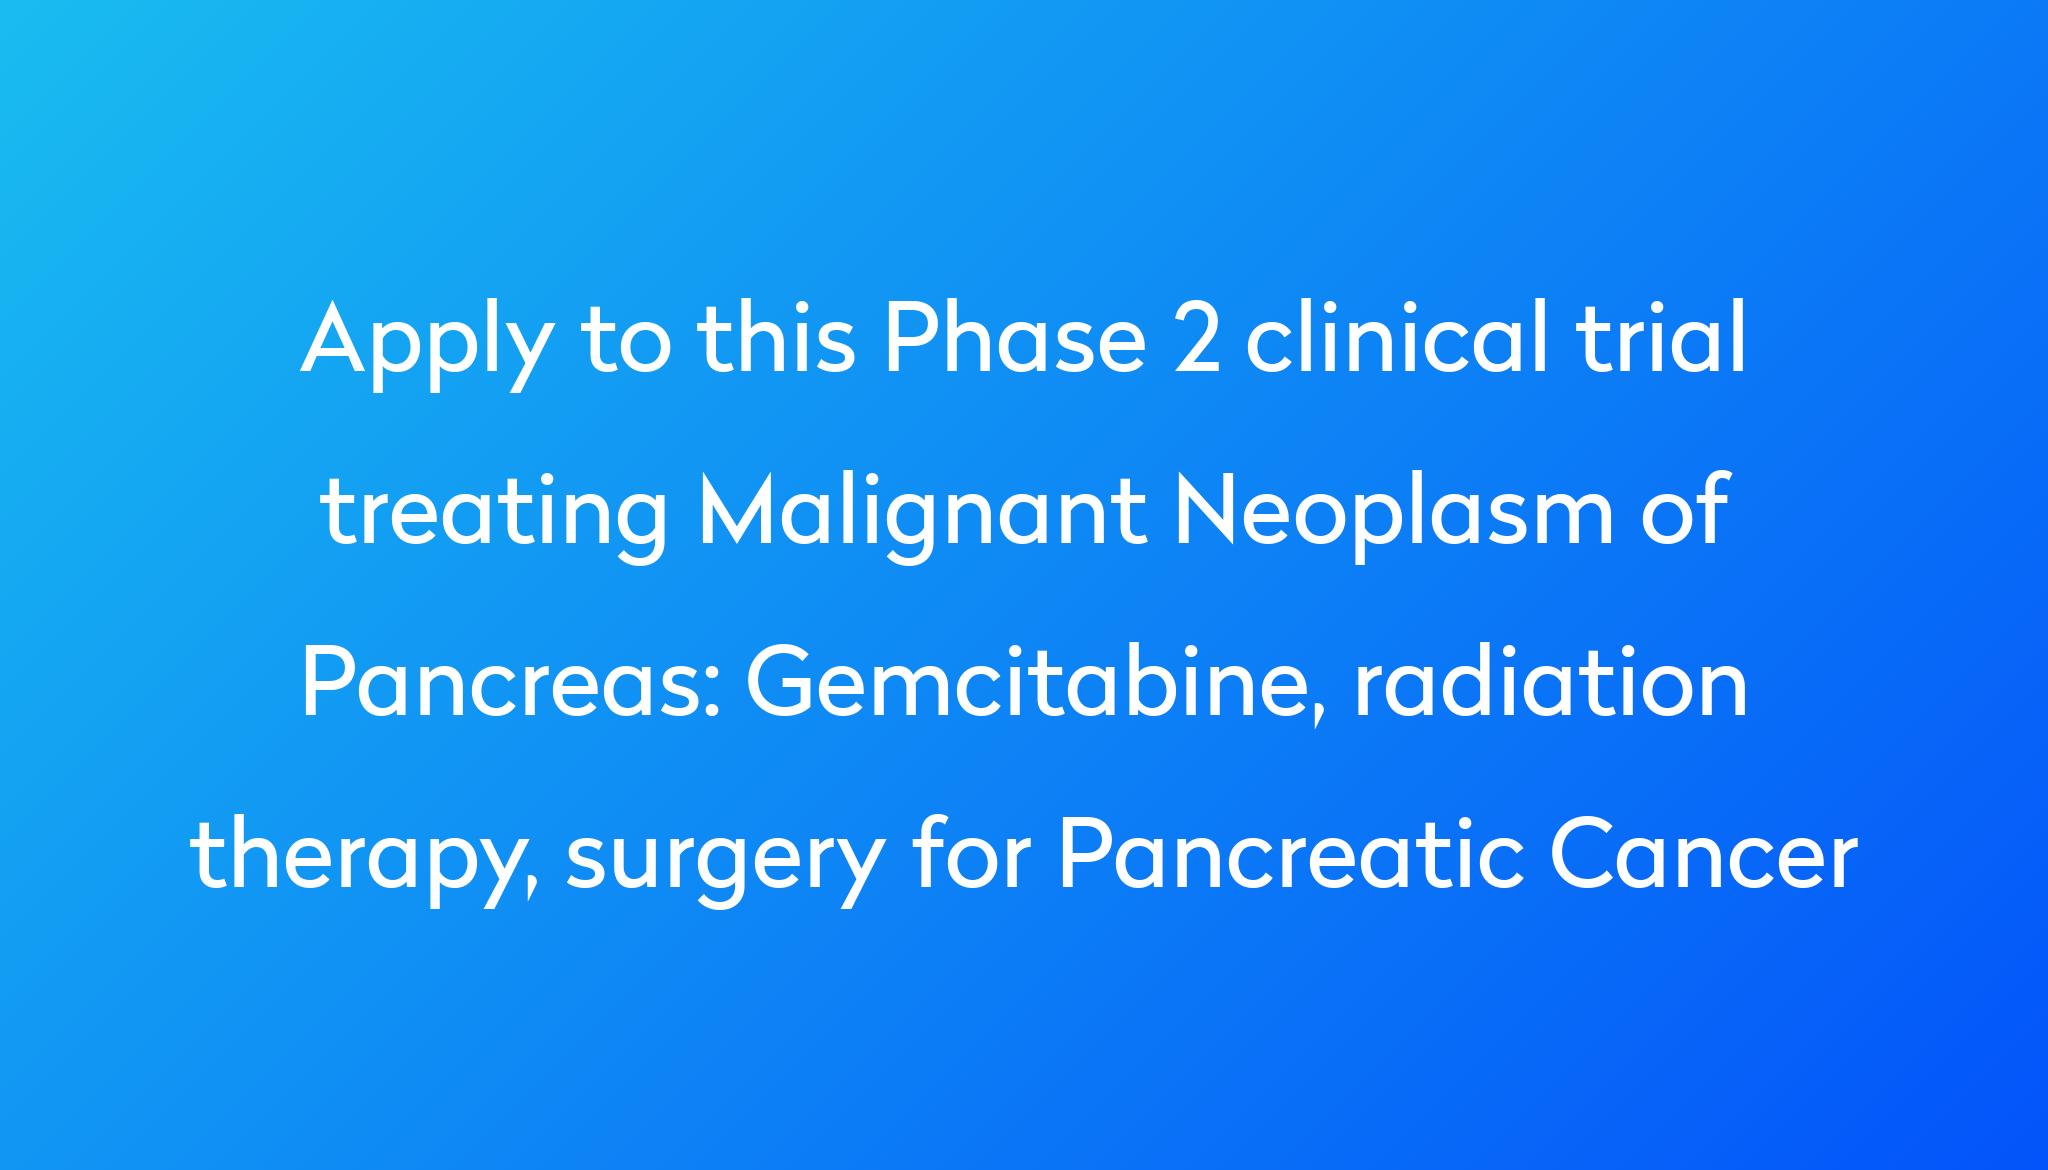 Gemcitabine Radiation Therapy Surgery For Pancreatic Cancer Clinical Trial 2023 Power 8335